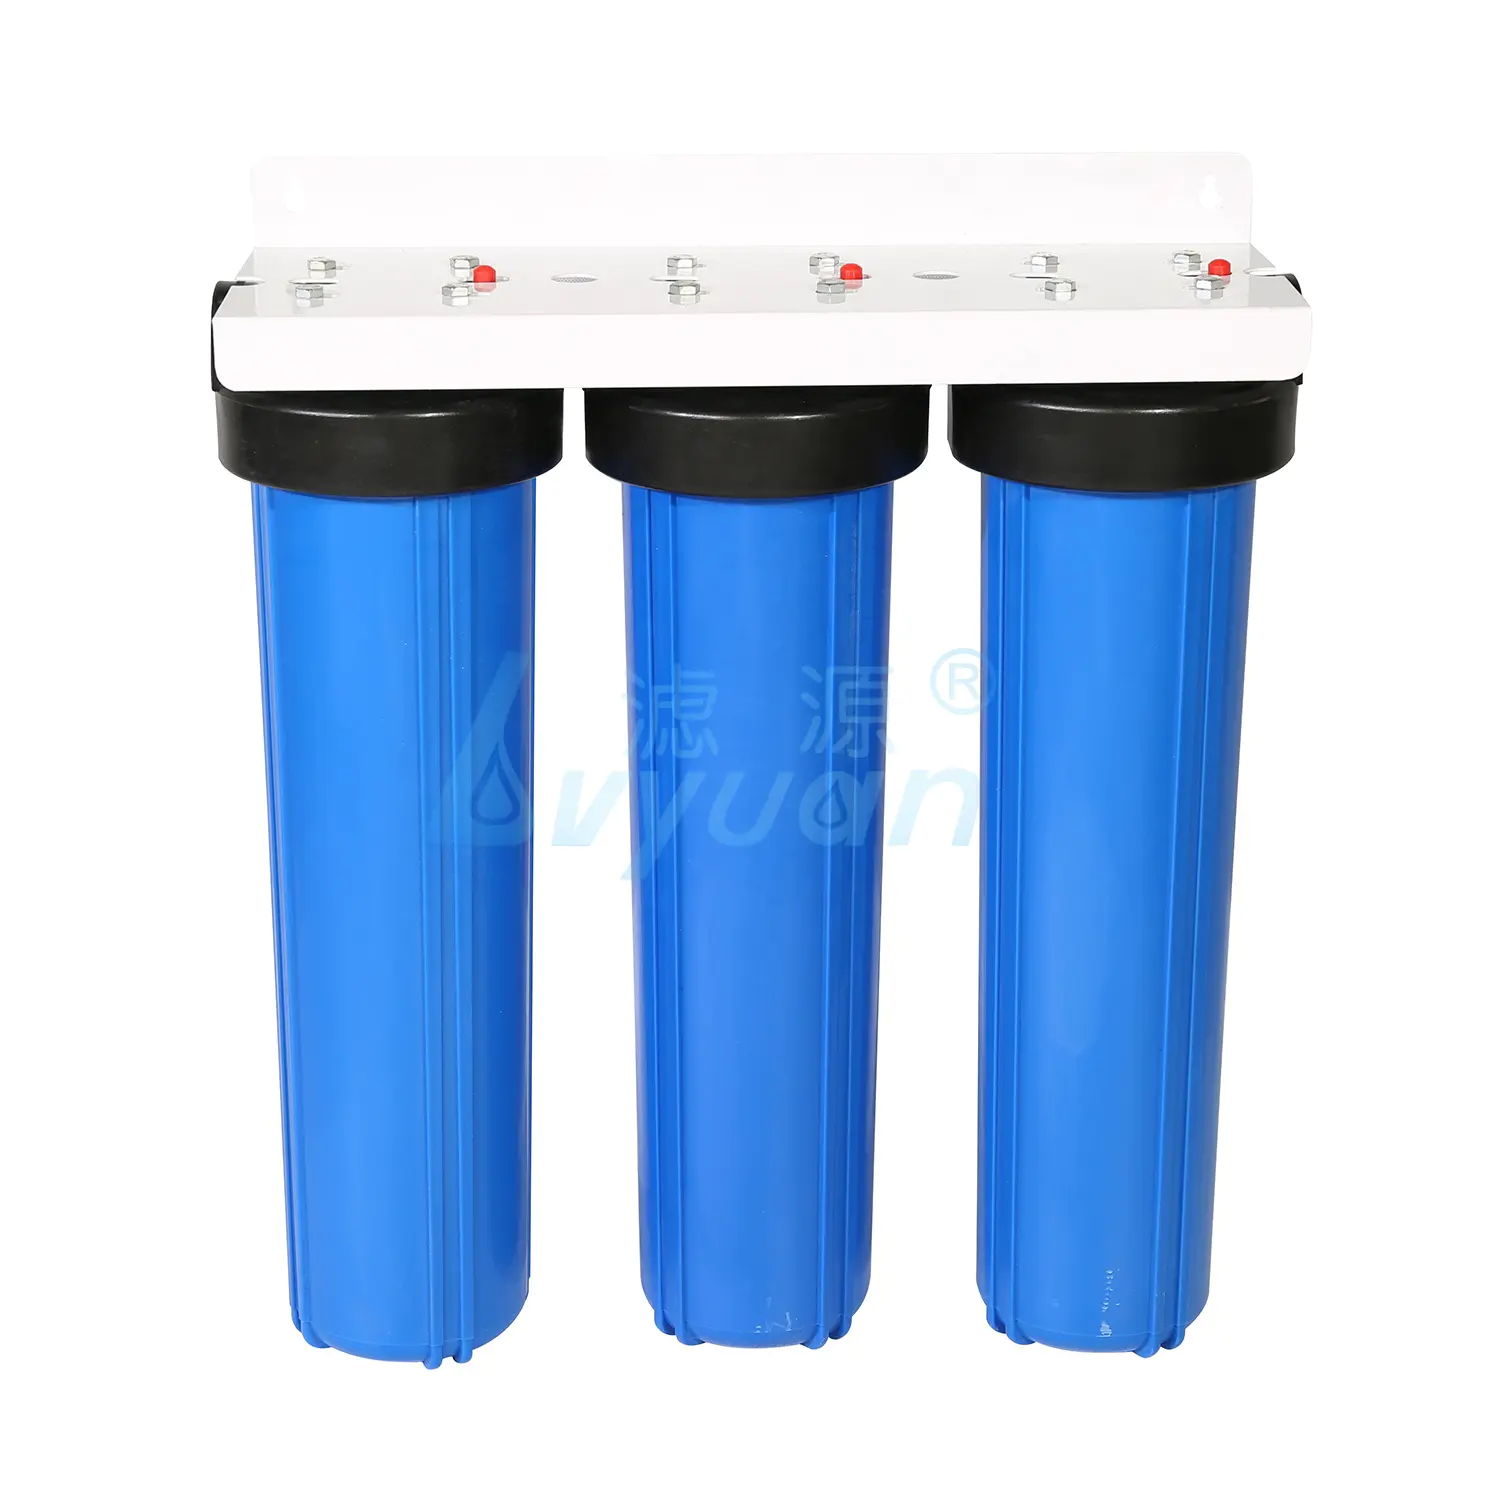 20 inch big blue water purifier filter housing and transparent clear housing for filtration